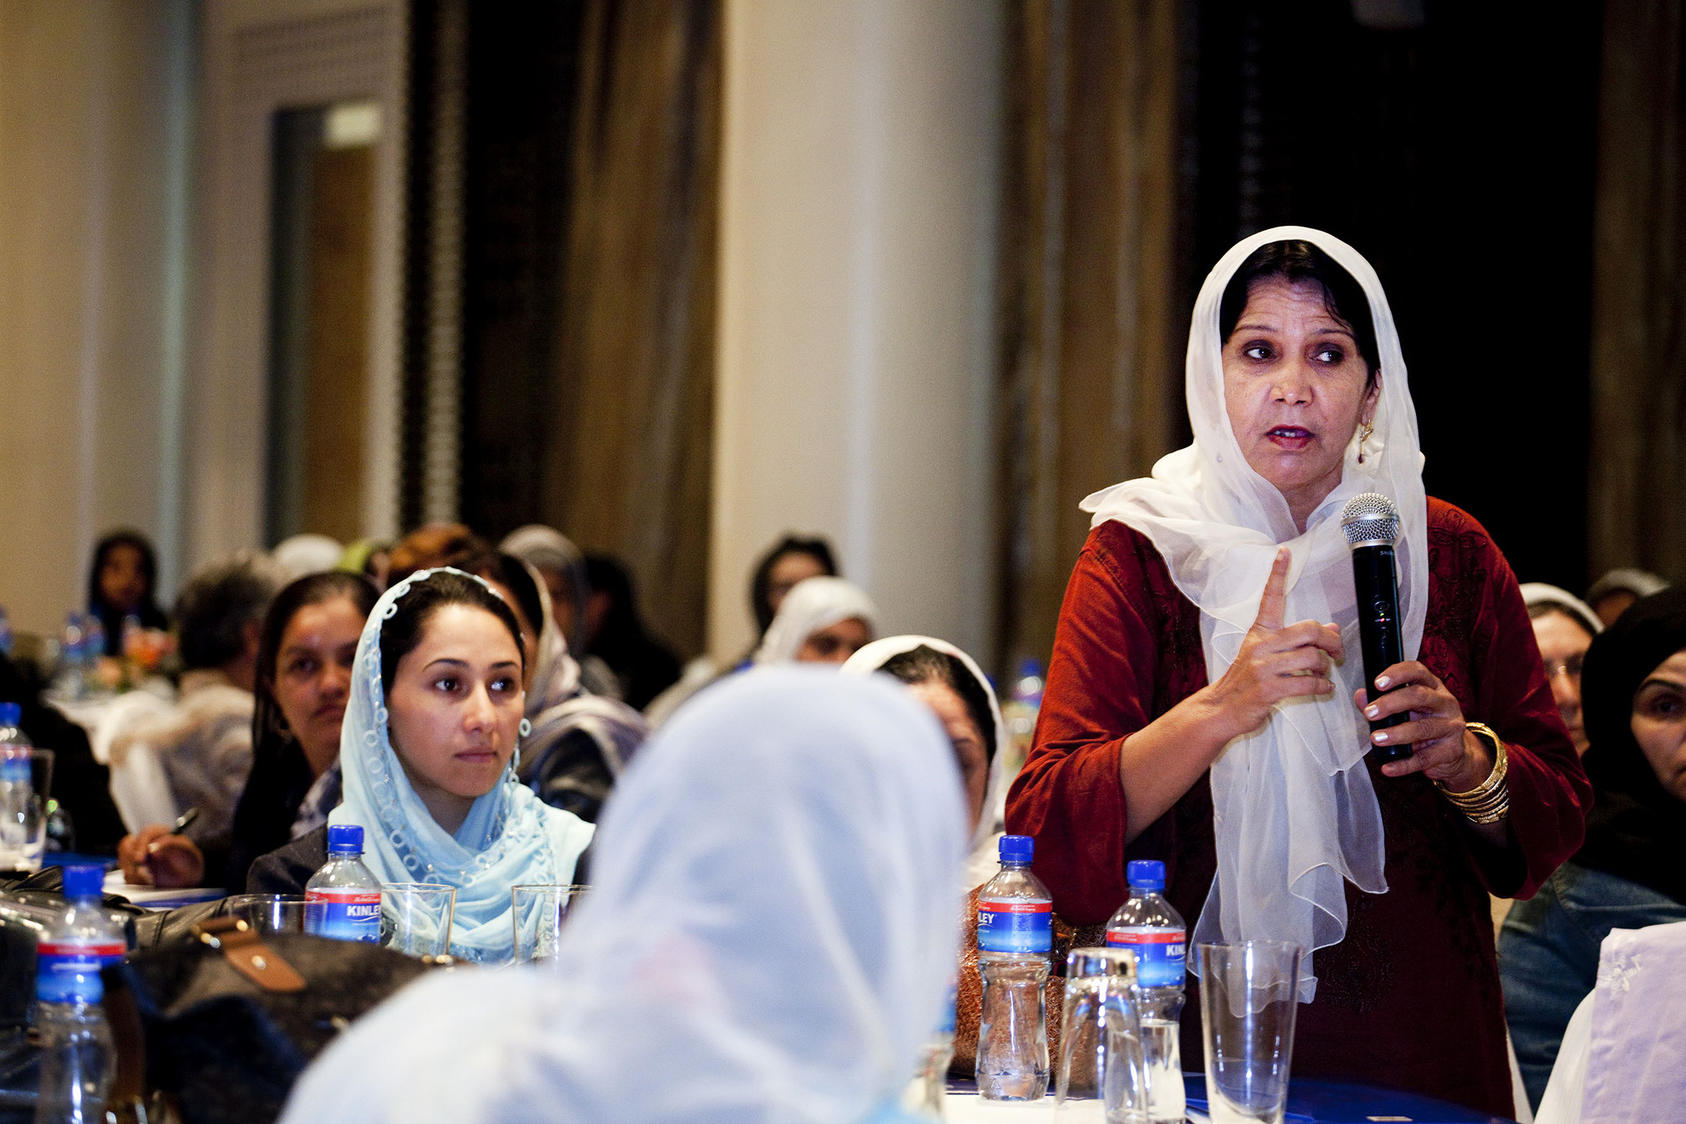 Afghan women at the Afghan Women's Movement Council during a conference in Kabul, on July 17, 2010. (Eros Hoagland/The New York Times)